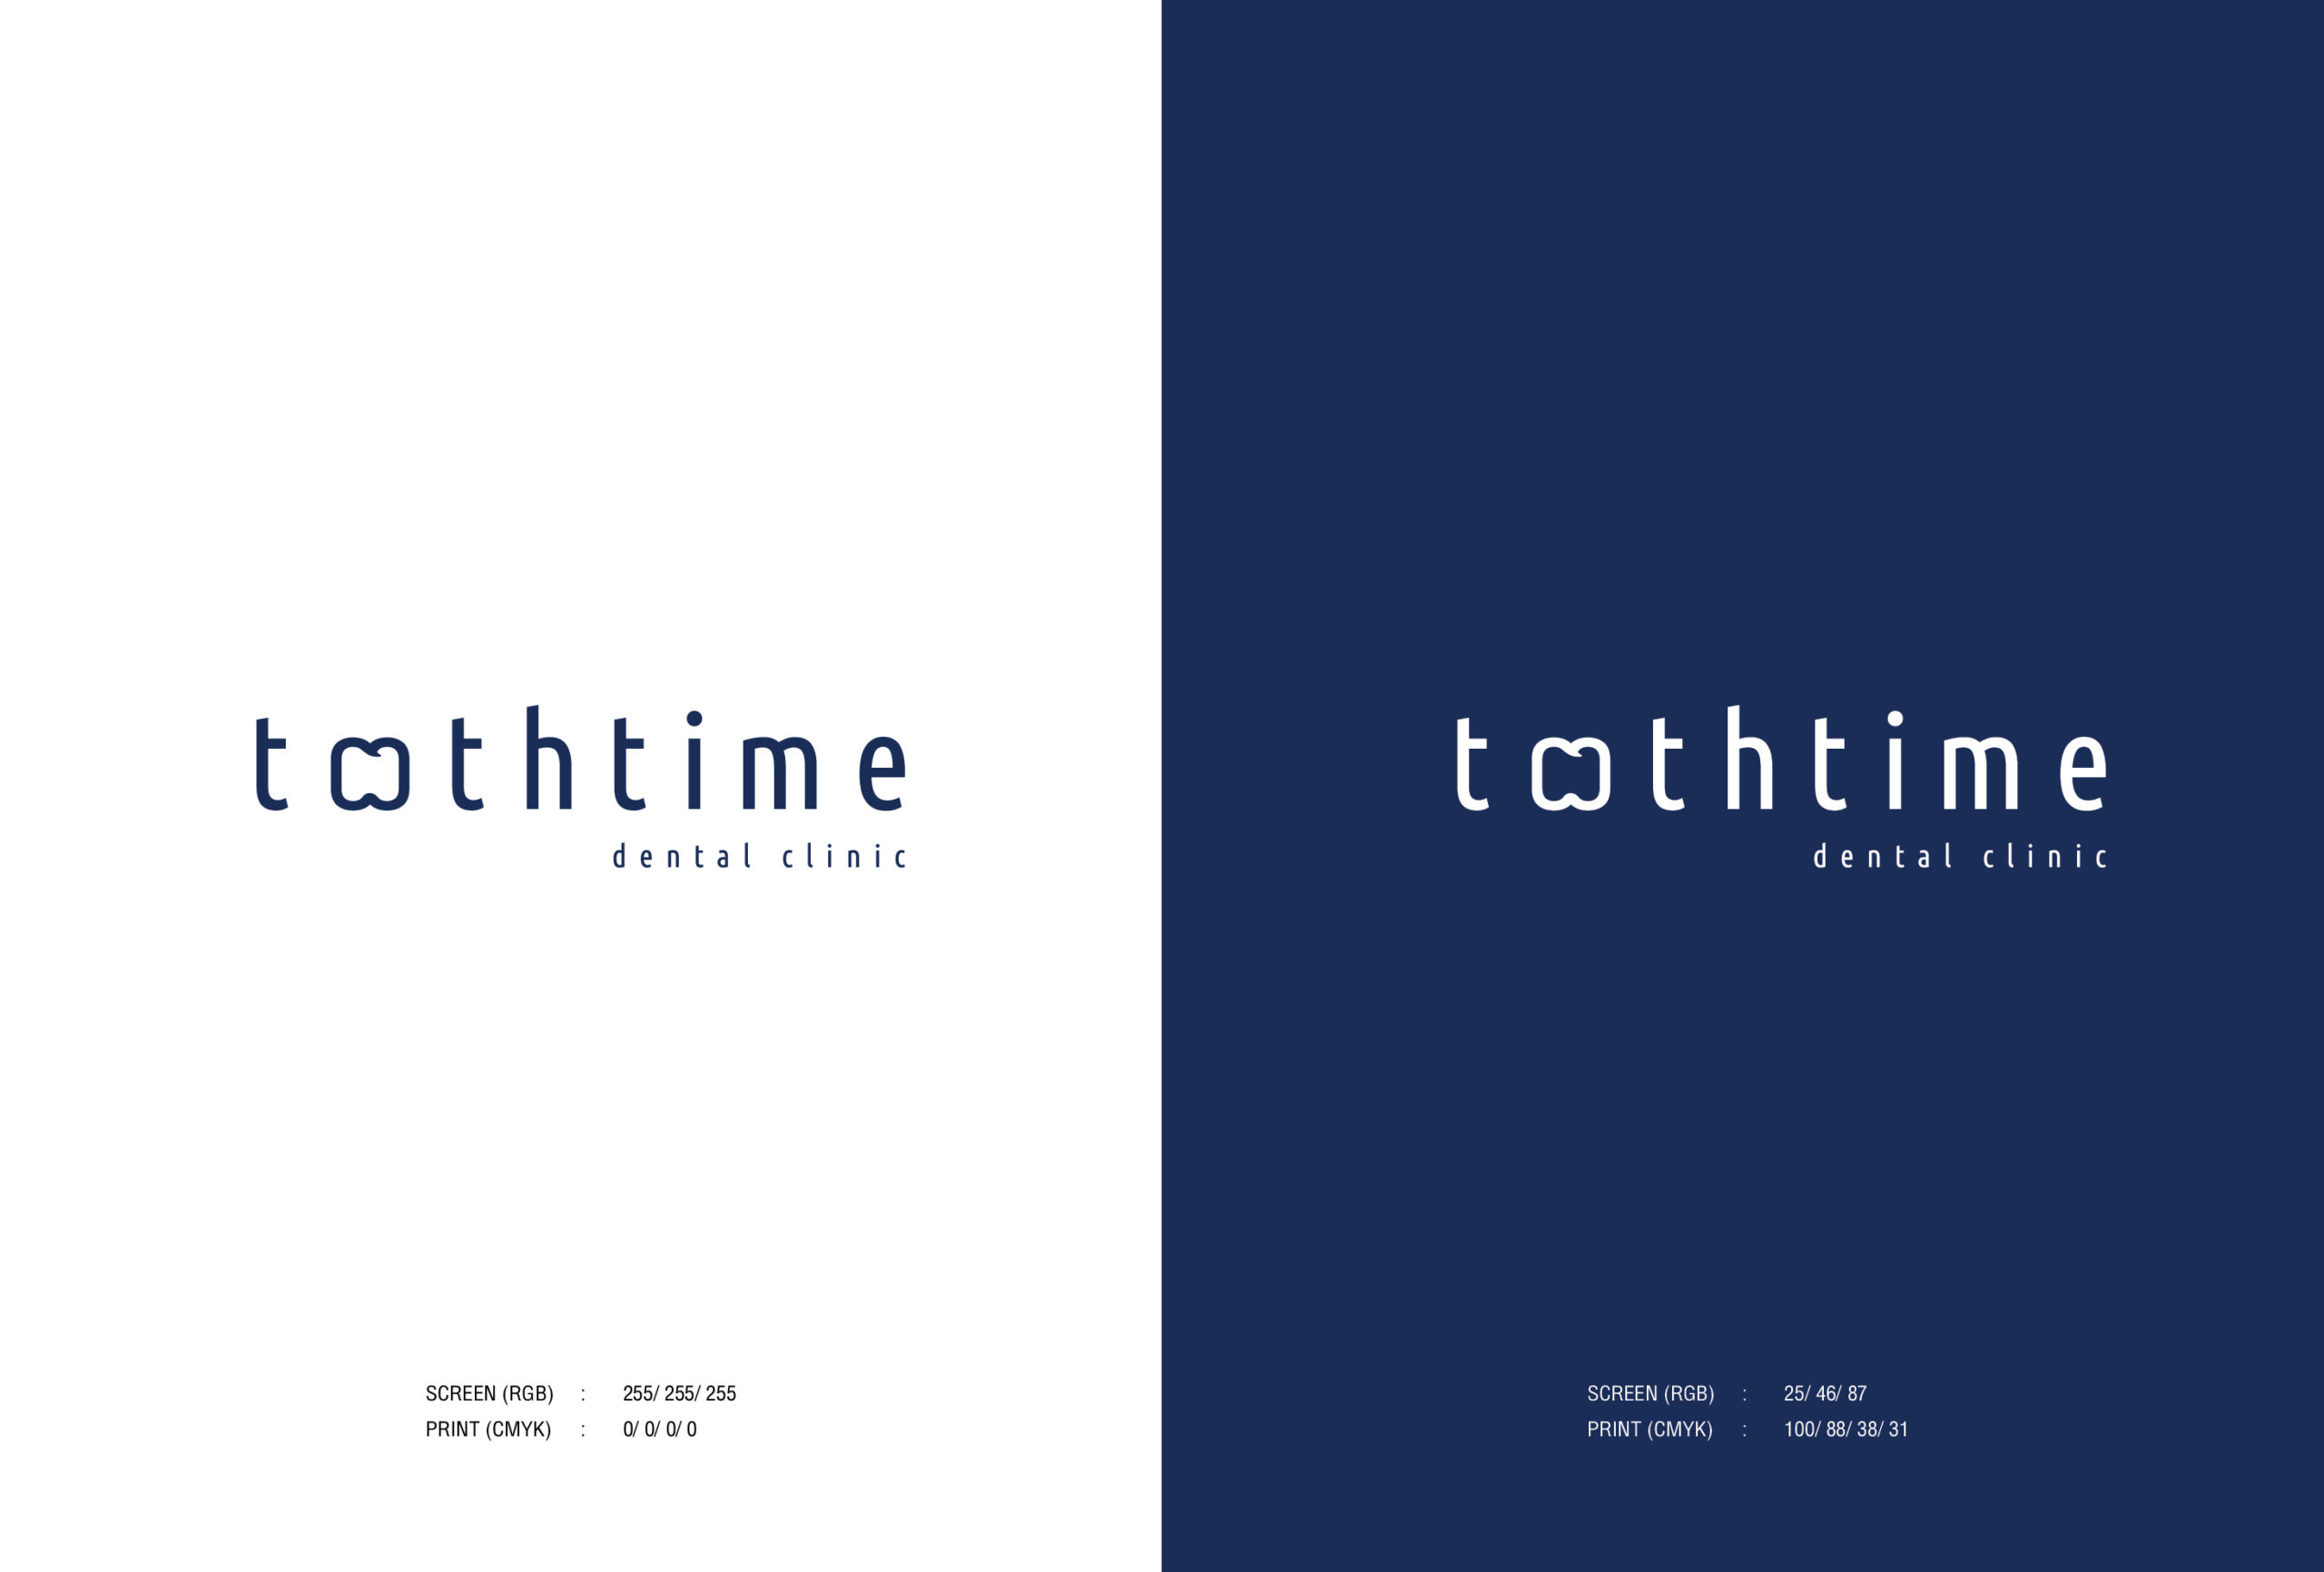 toothtime _for web-02